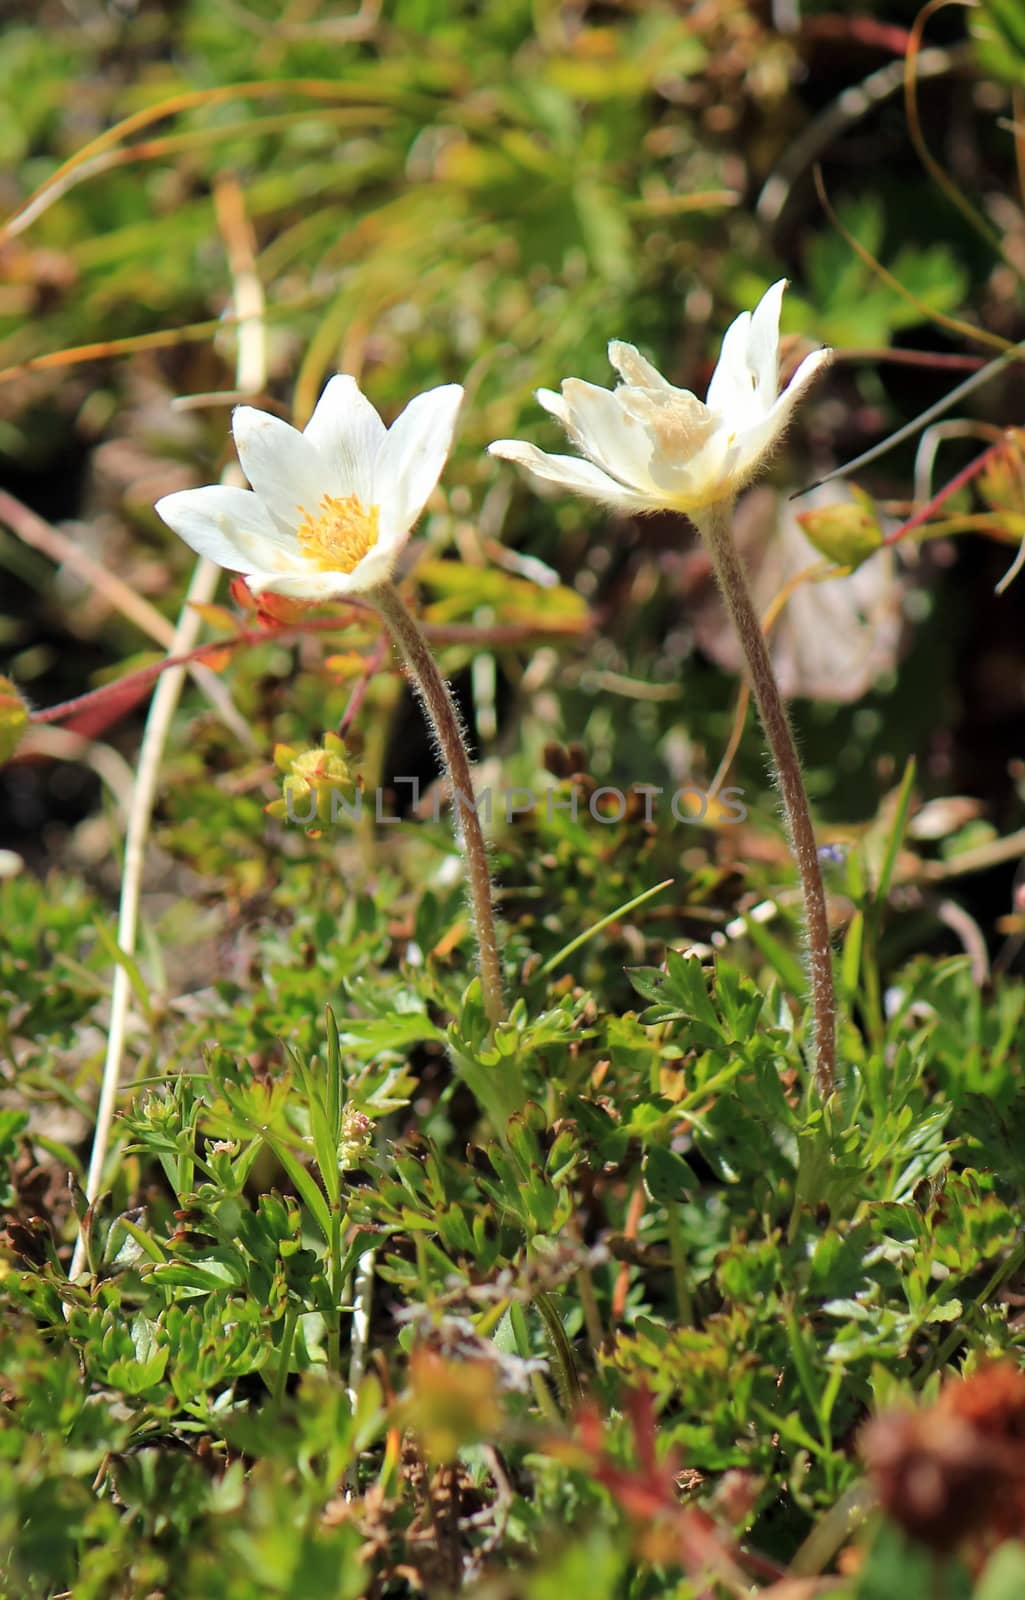 Two anemones in the grass in nature